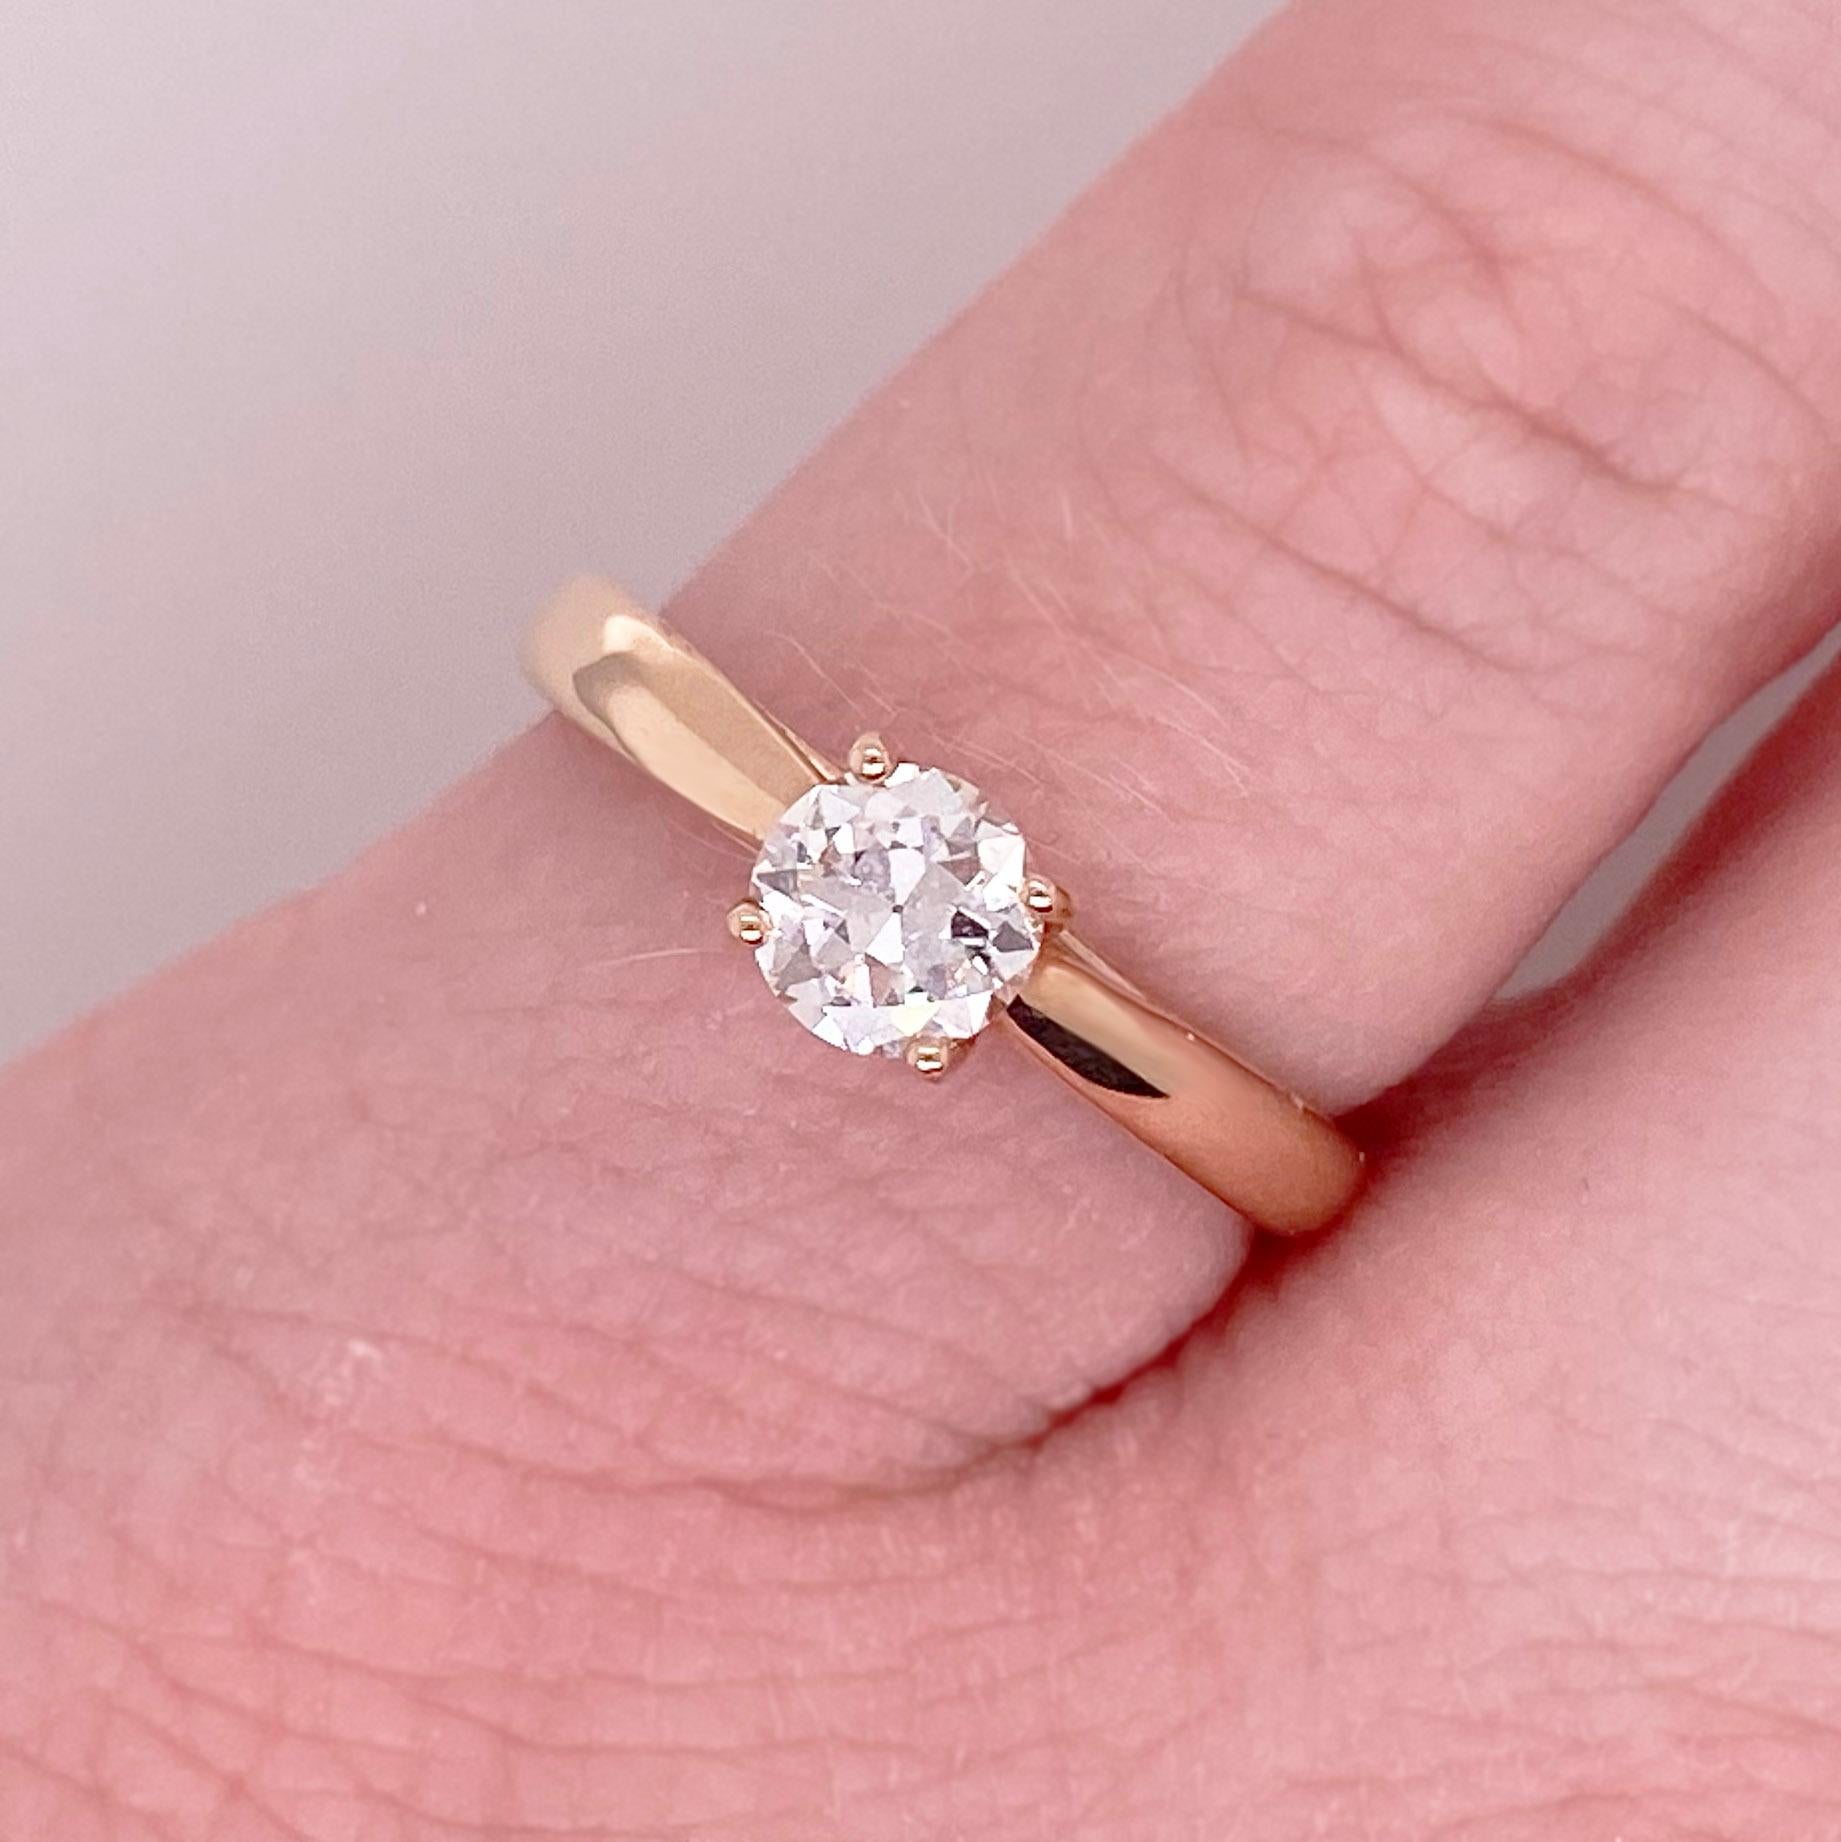 Gorgeous round old European cut diamond solitaire engagement ring! This gorgeous center diamond is set in four polished prongs. The 14 karat rose gold engagement ring is the perfect compliment to this stunning round diamond. Very stunning and